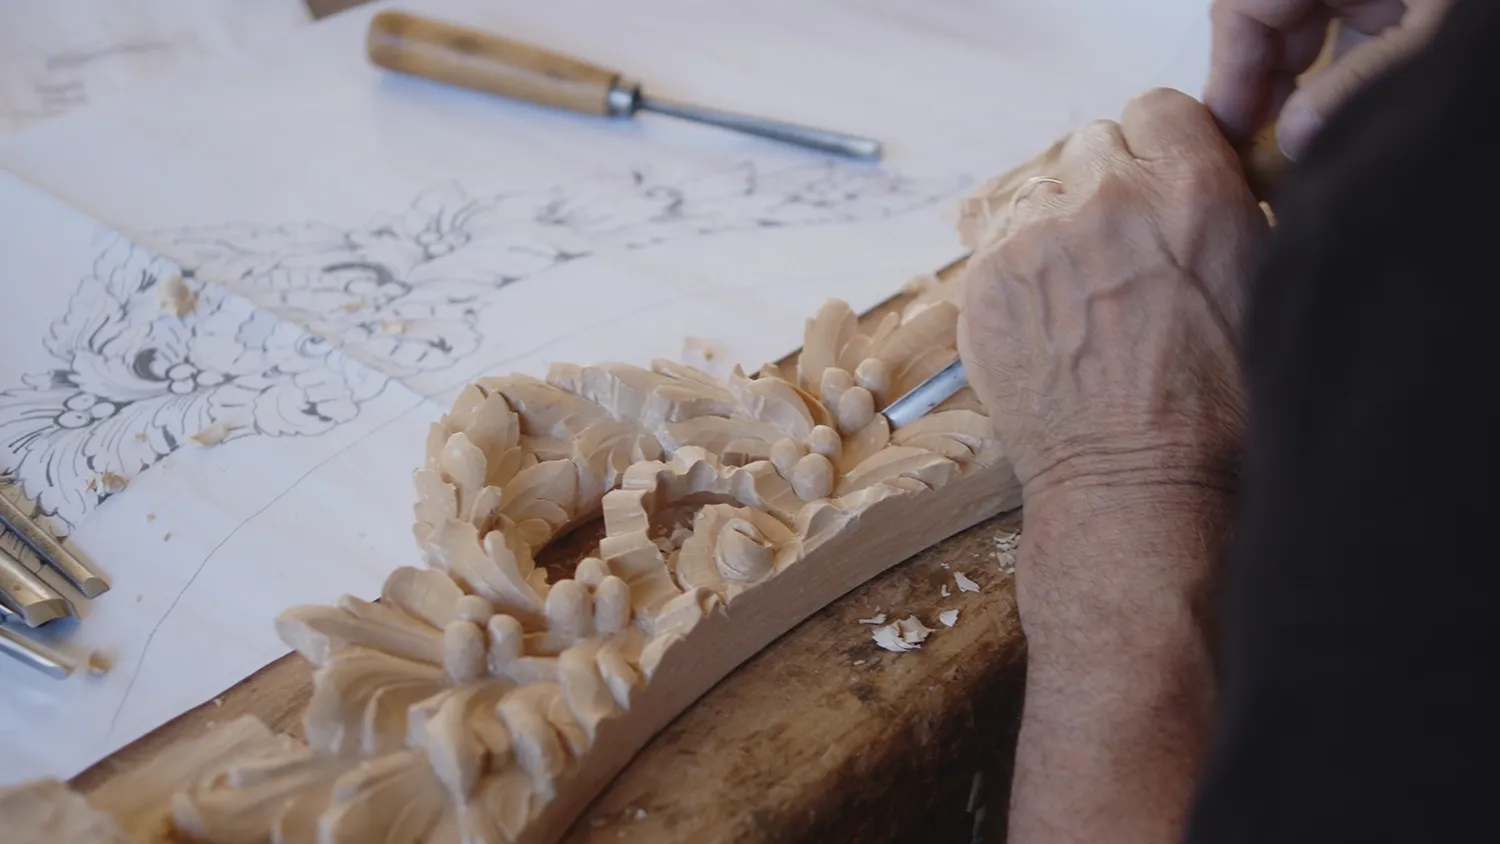 Craftsmen with decades of experience create carvings for the best luxury furniture